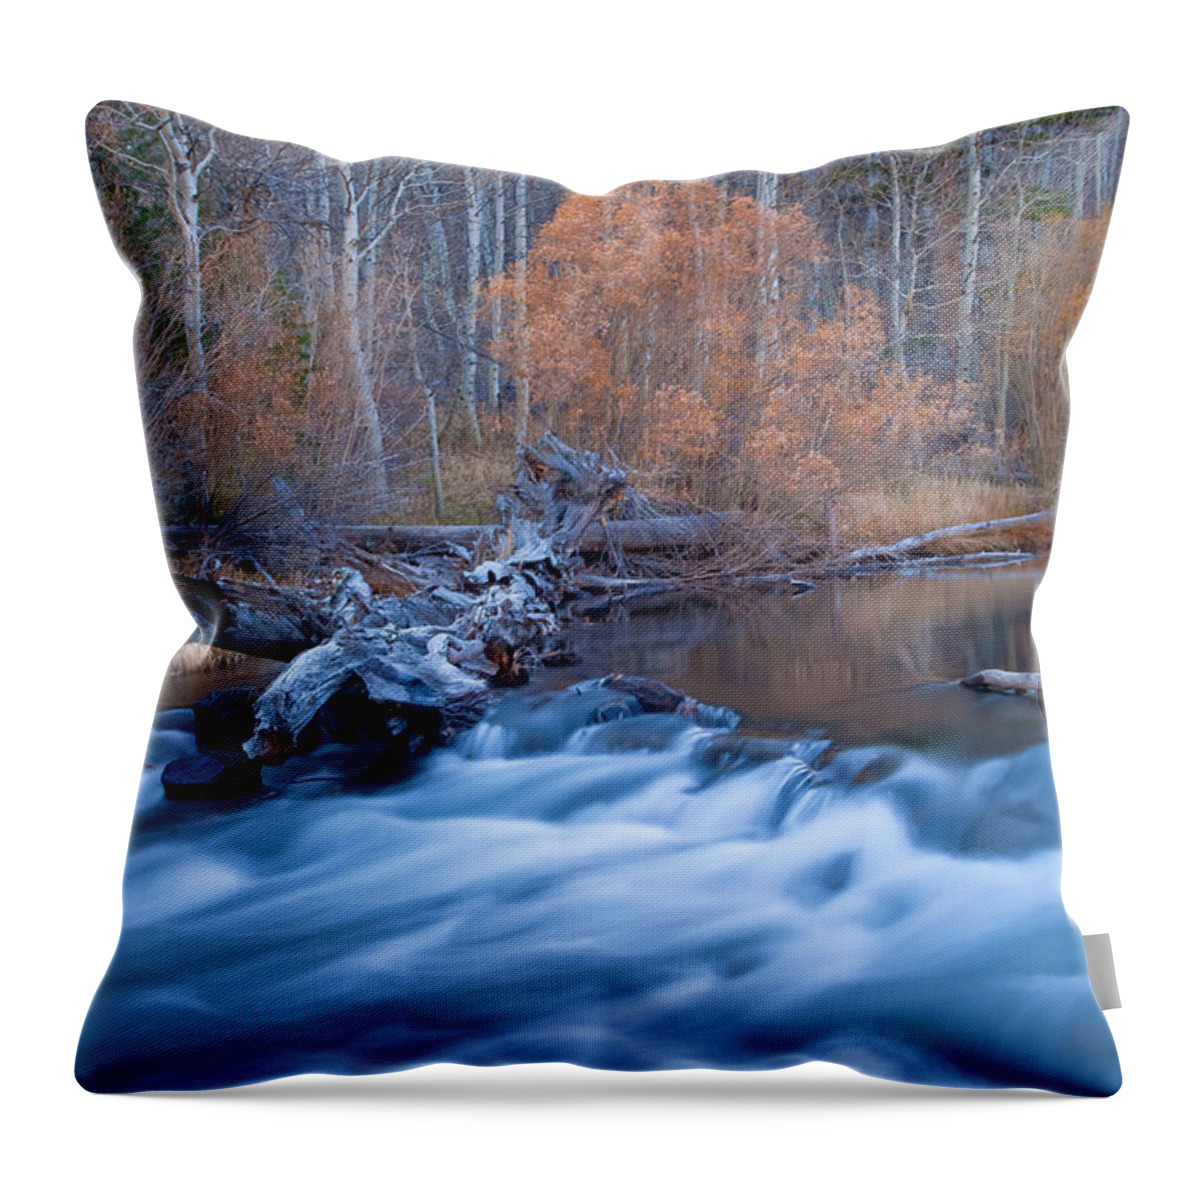 Nature Throw Pillow featuring the photograph Silence Of The Fall by Jonathan Nguyen